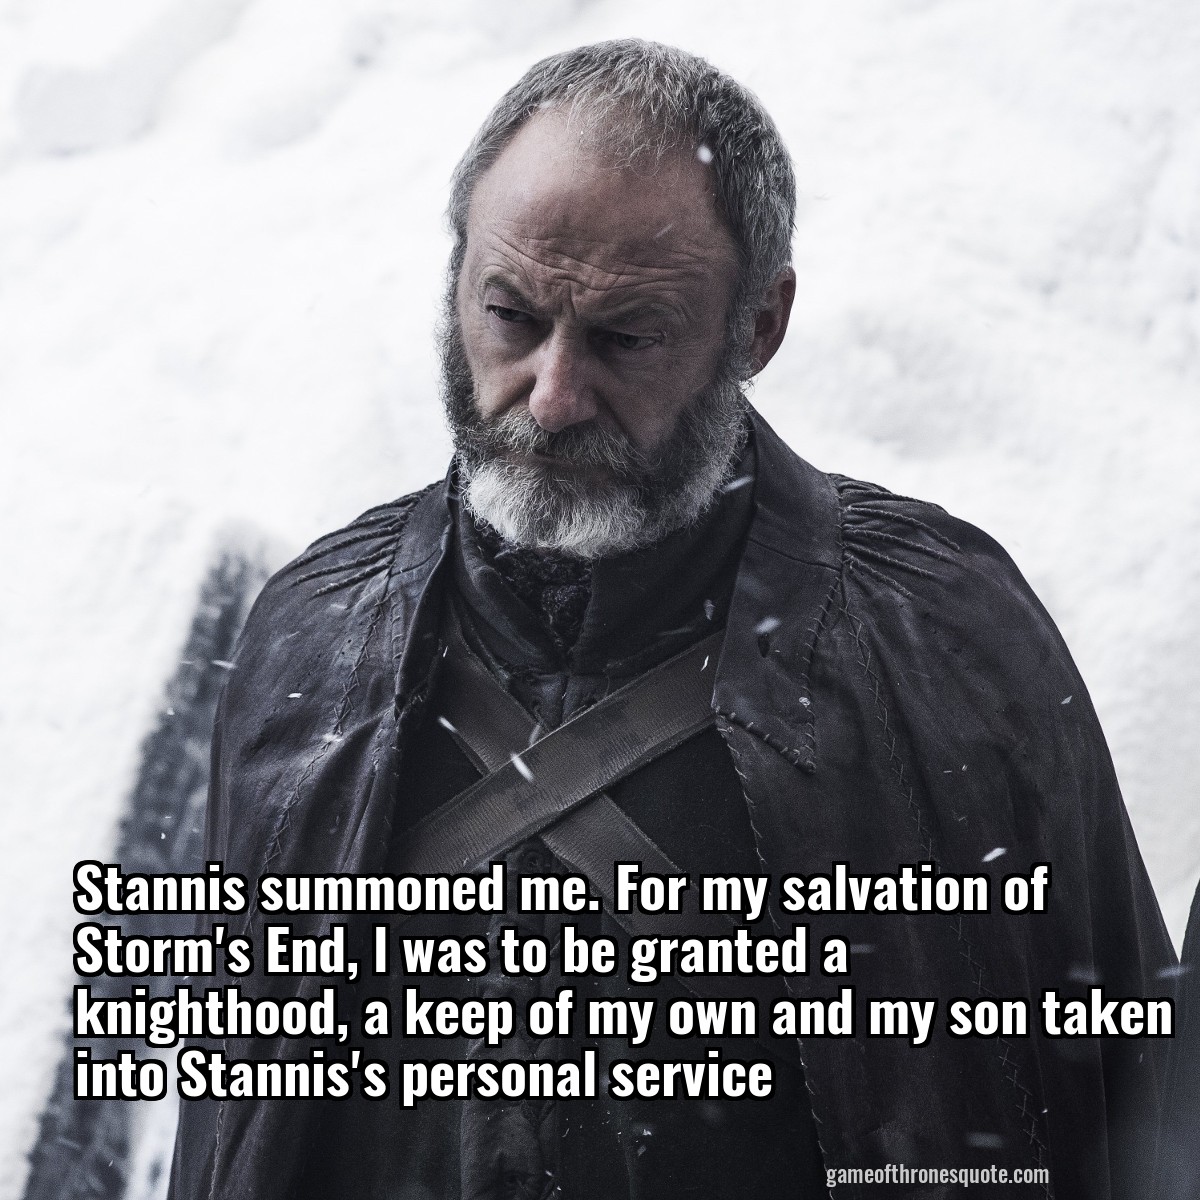 Davos Seaworth Stannis Summoned Me For My Salvation Of Storm S End L Was Game Of Thrones Quote